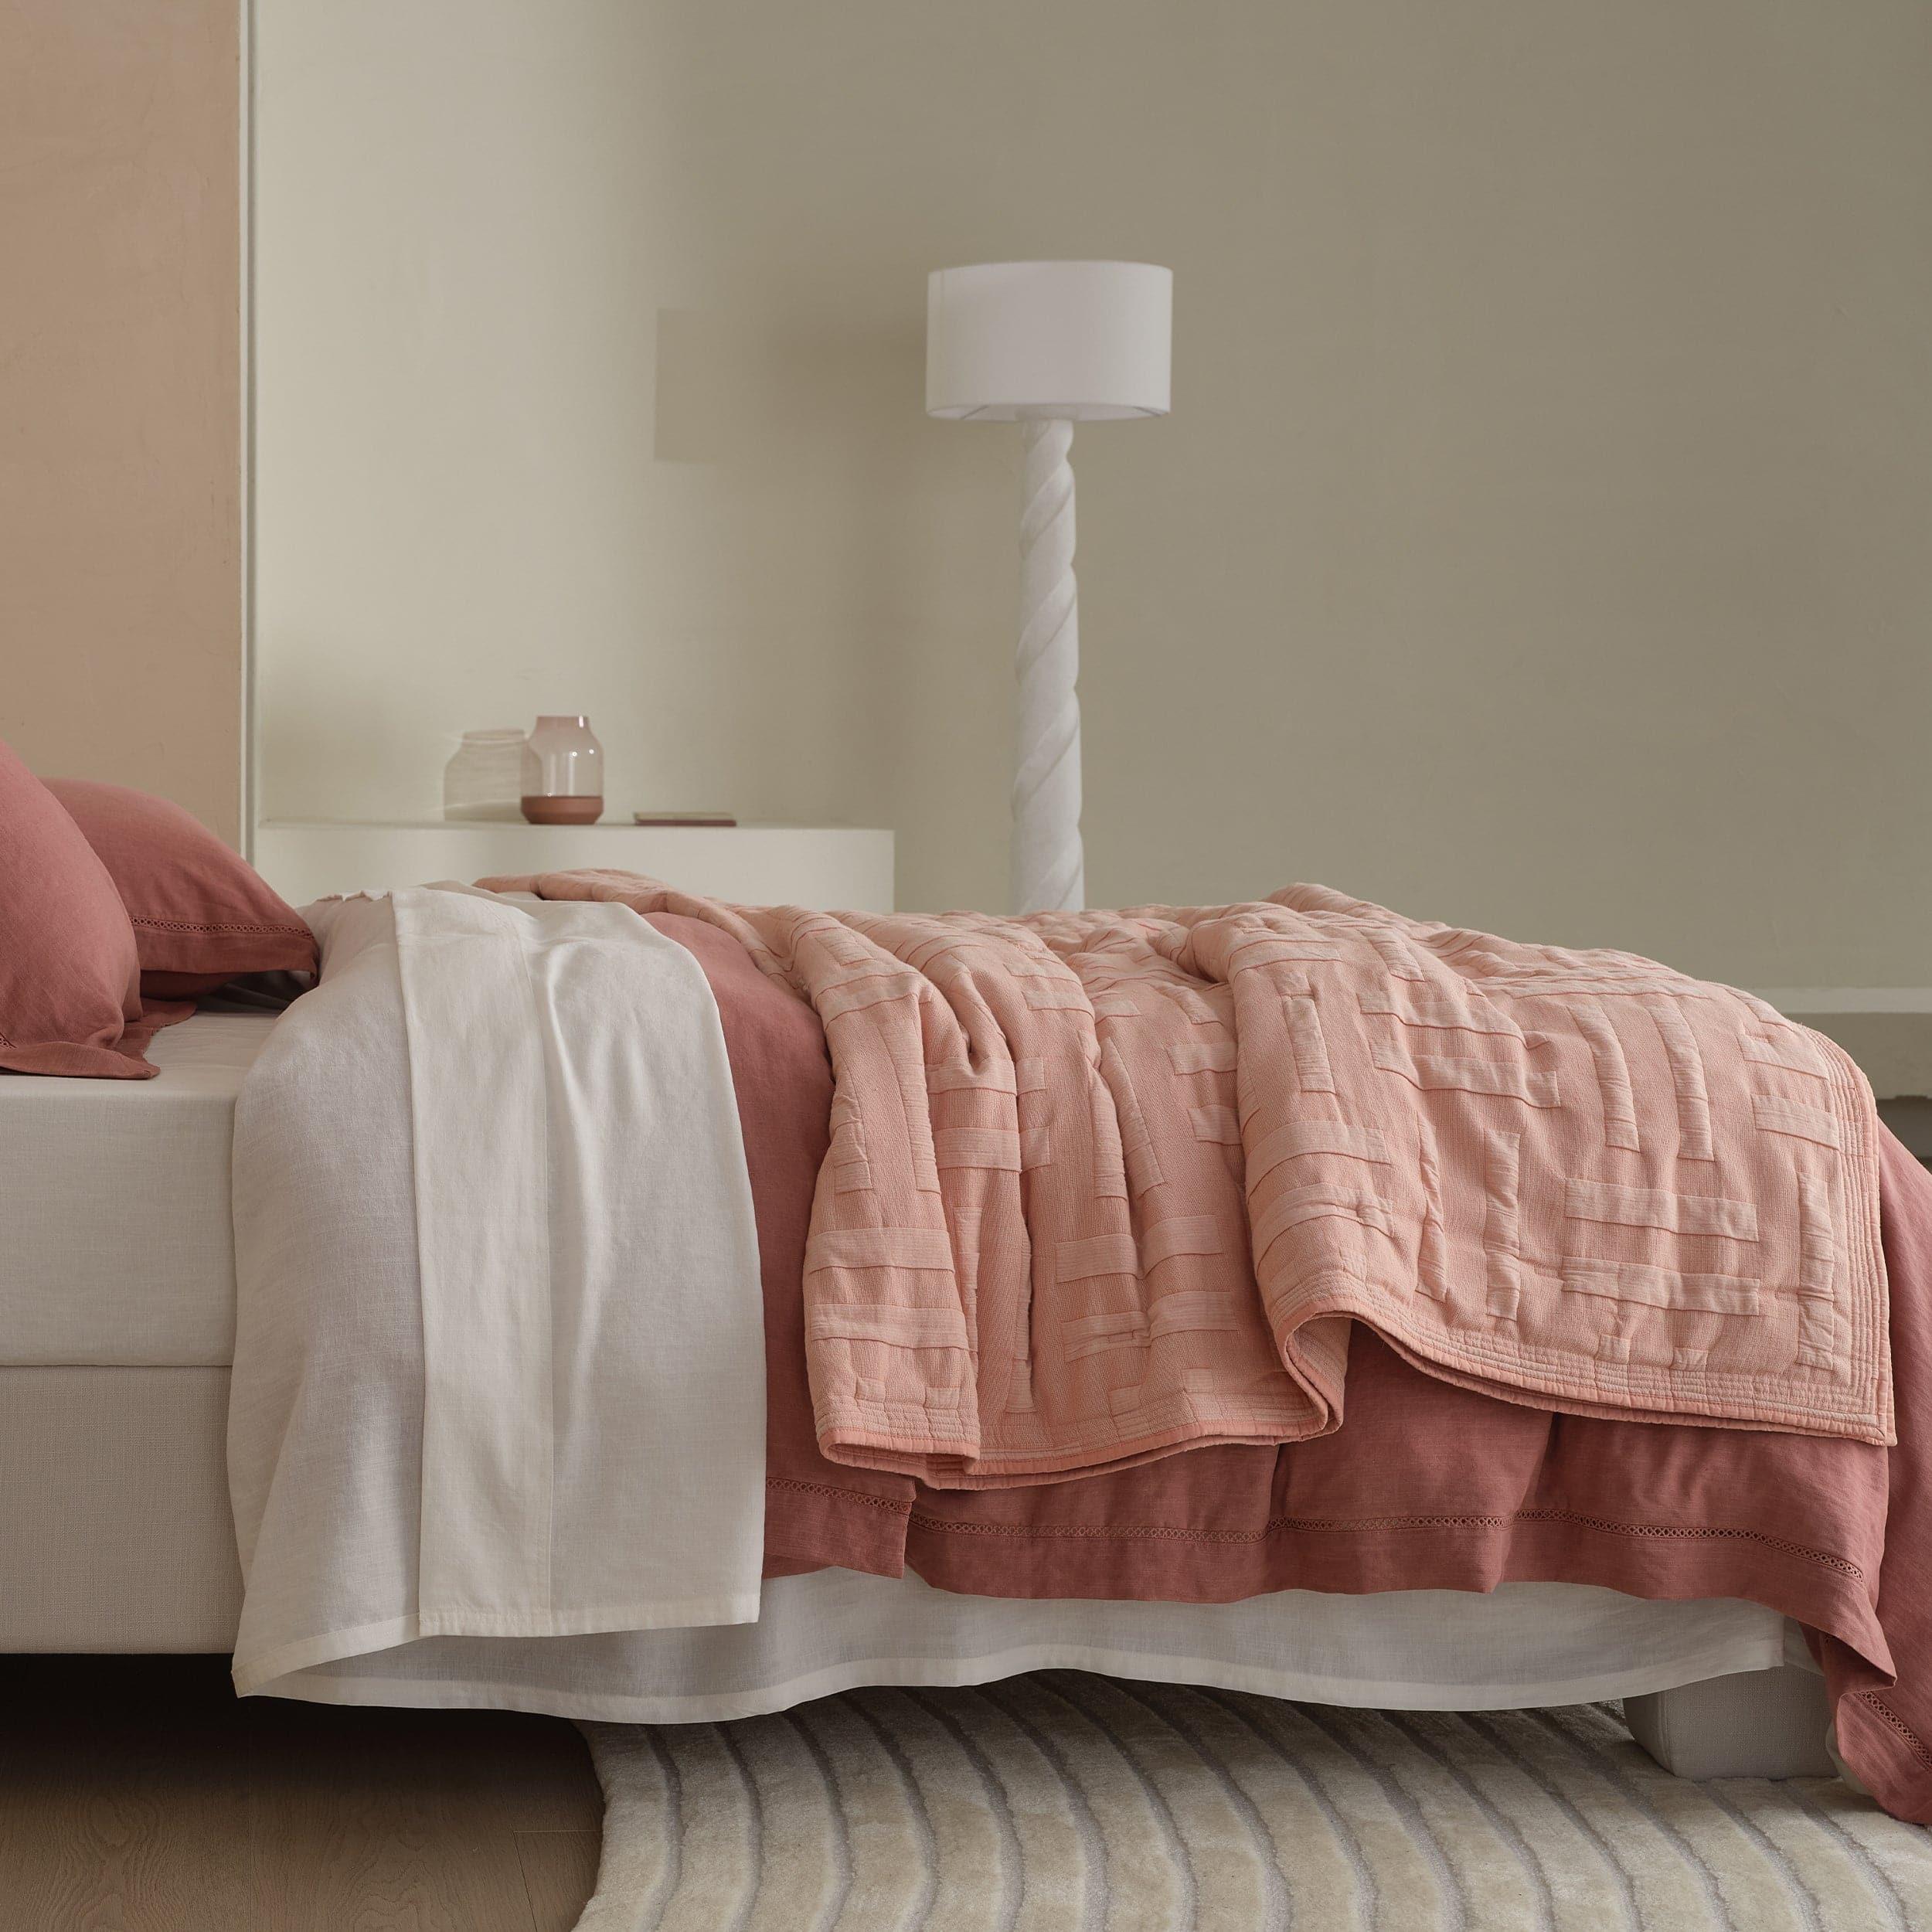 Fall in love with the comfort and charm of our queen quilt sets, offering a perfect balance of style and practicality.